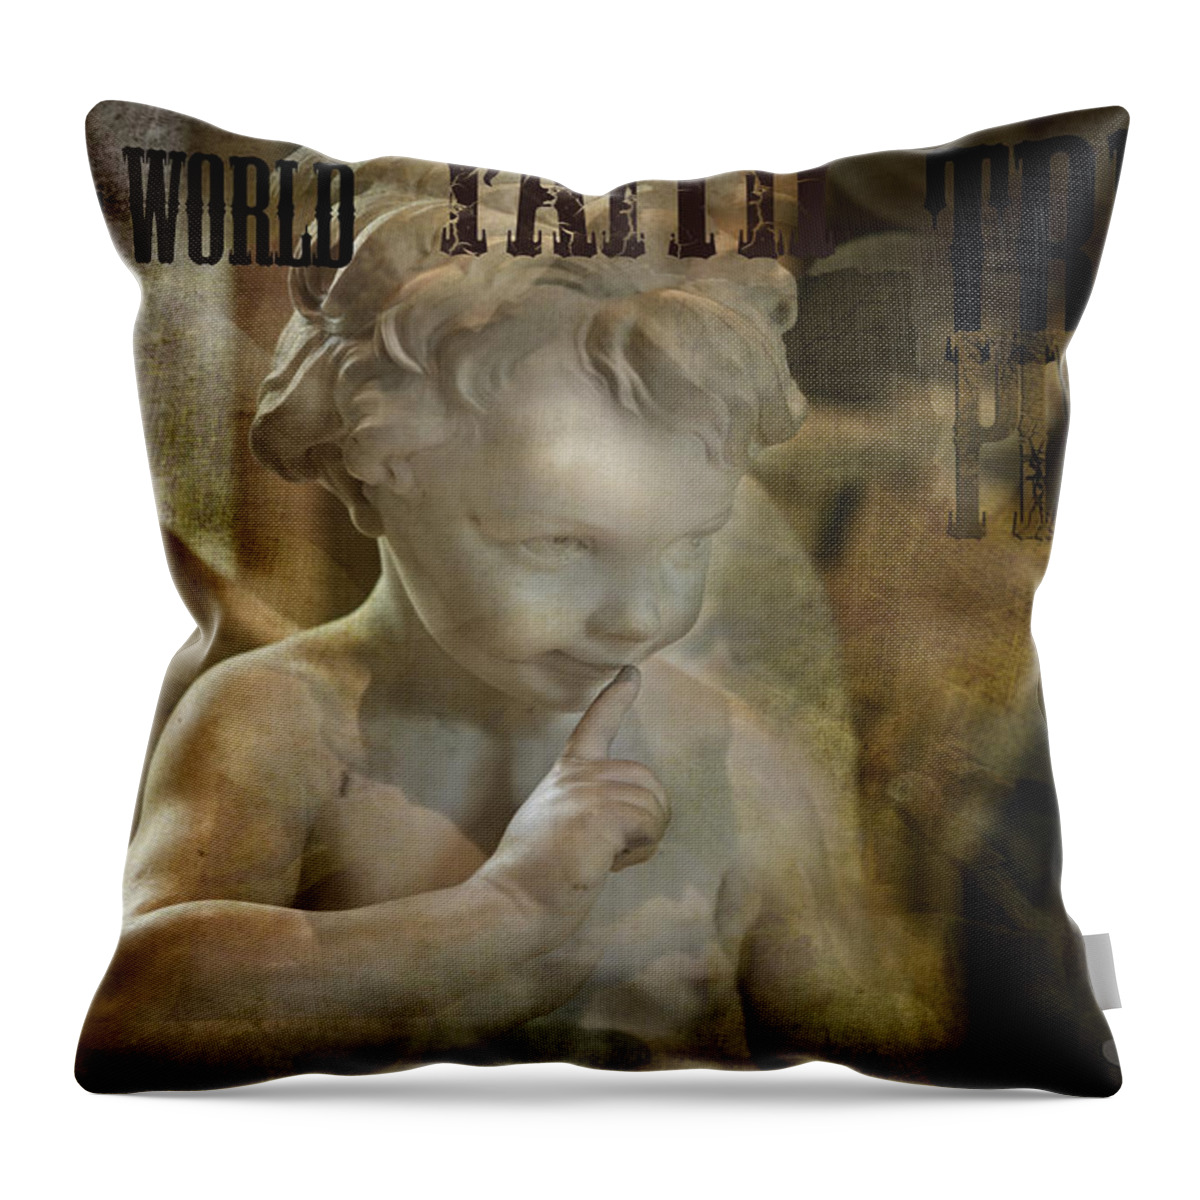 Evie Carrier Throw Pillow featuring the photograph Peter Pan Pixie Dust by Evie Carrier